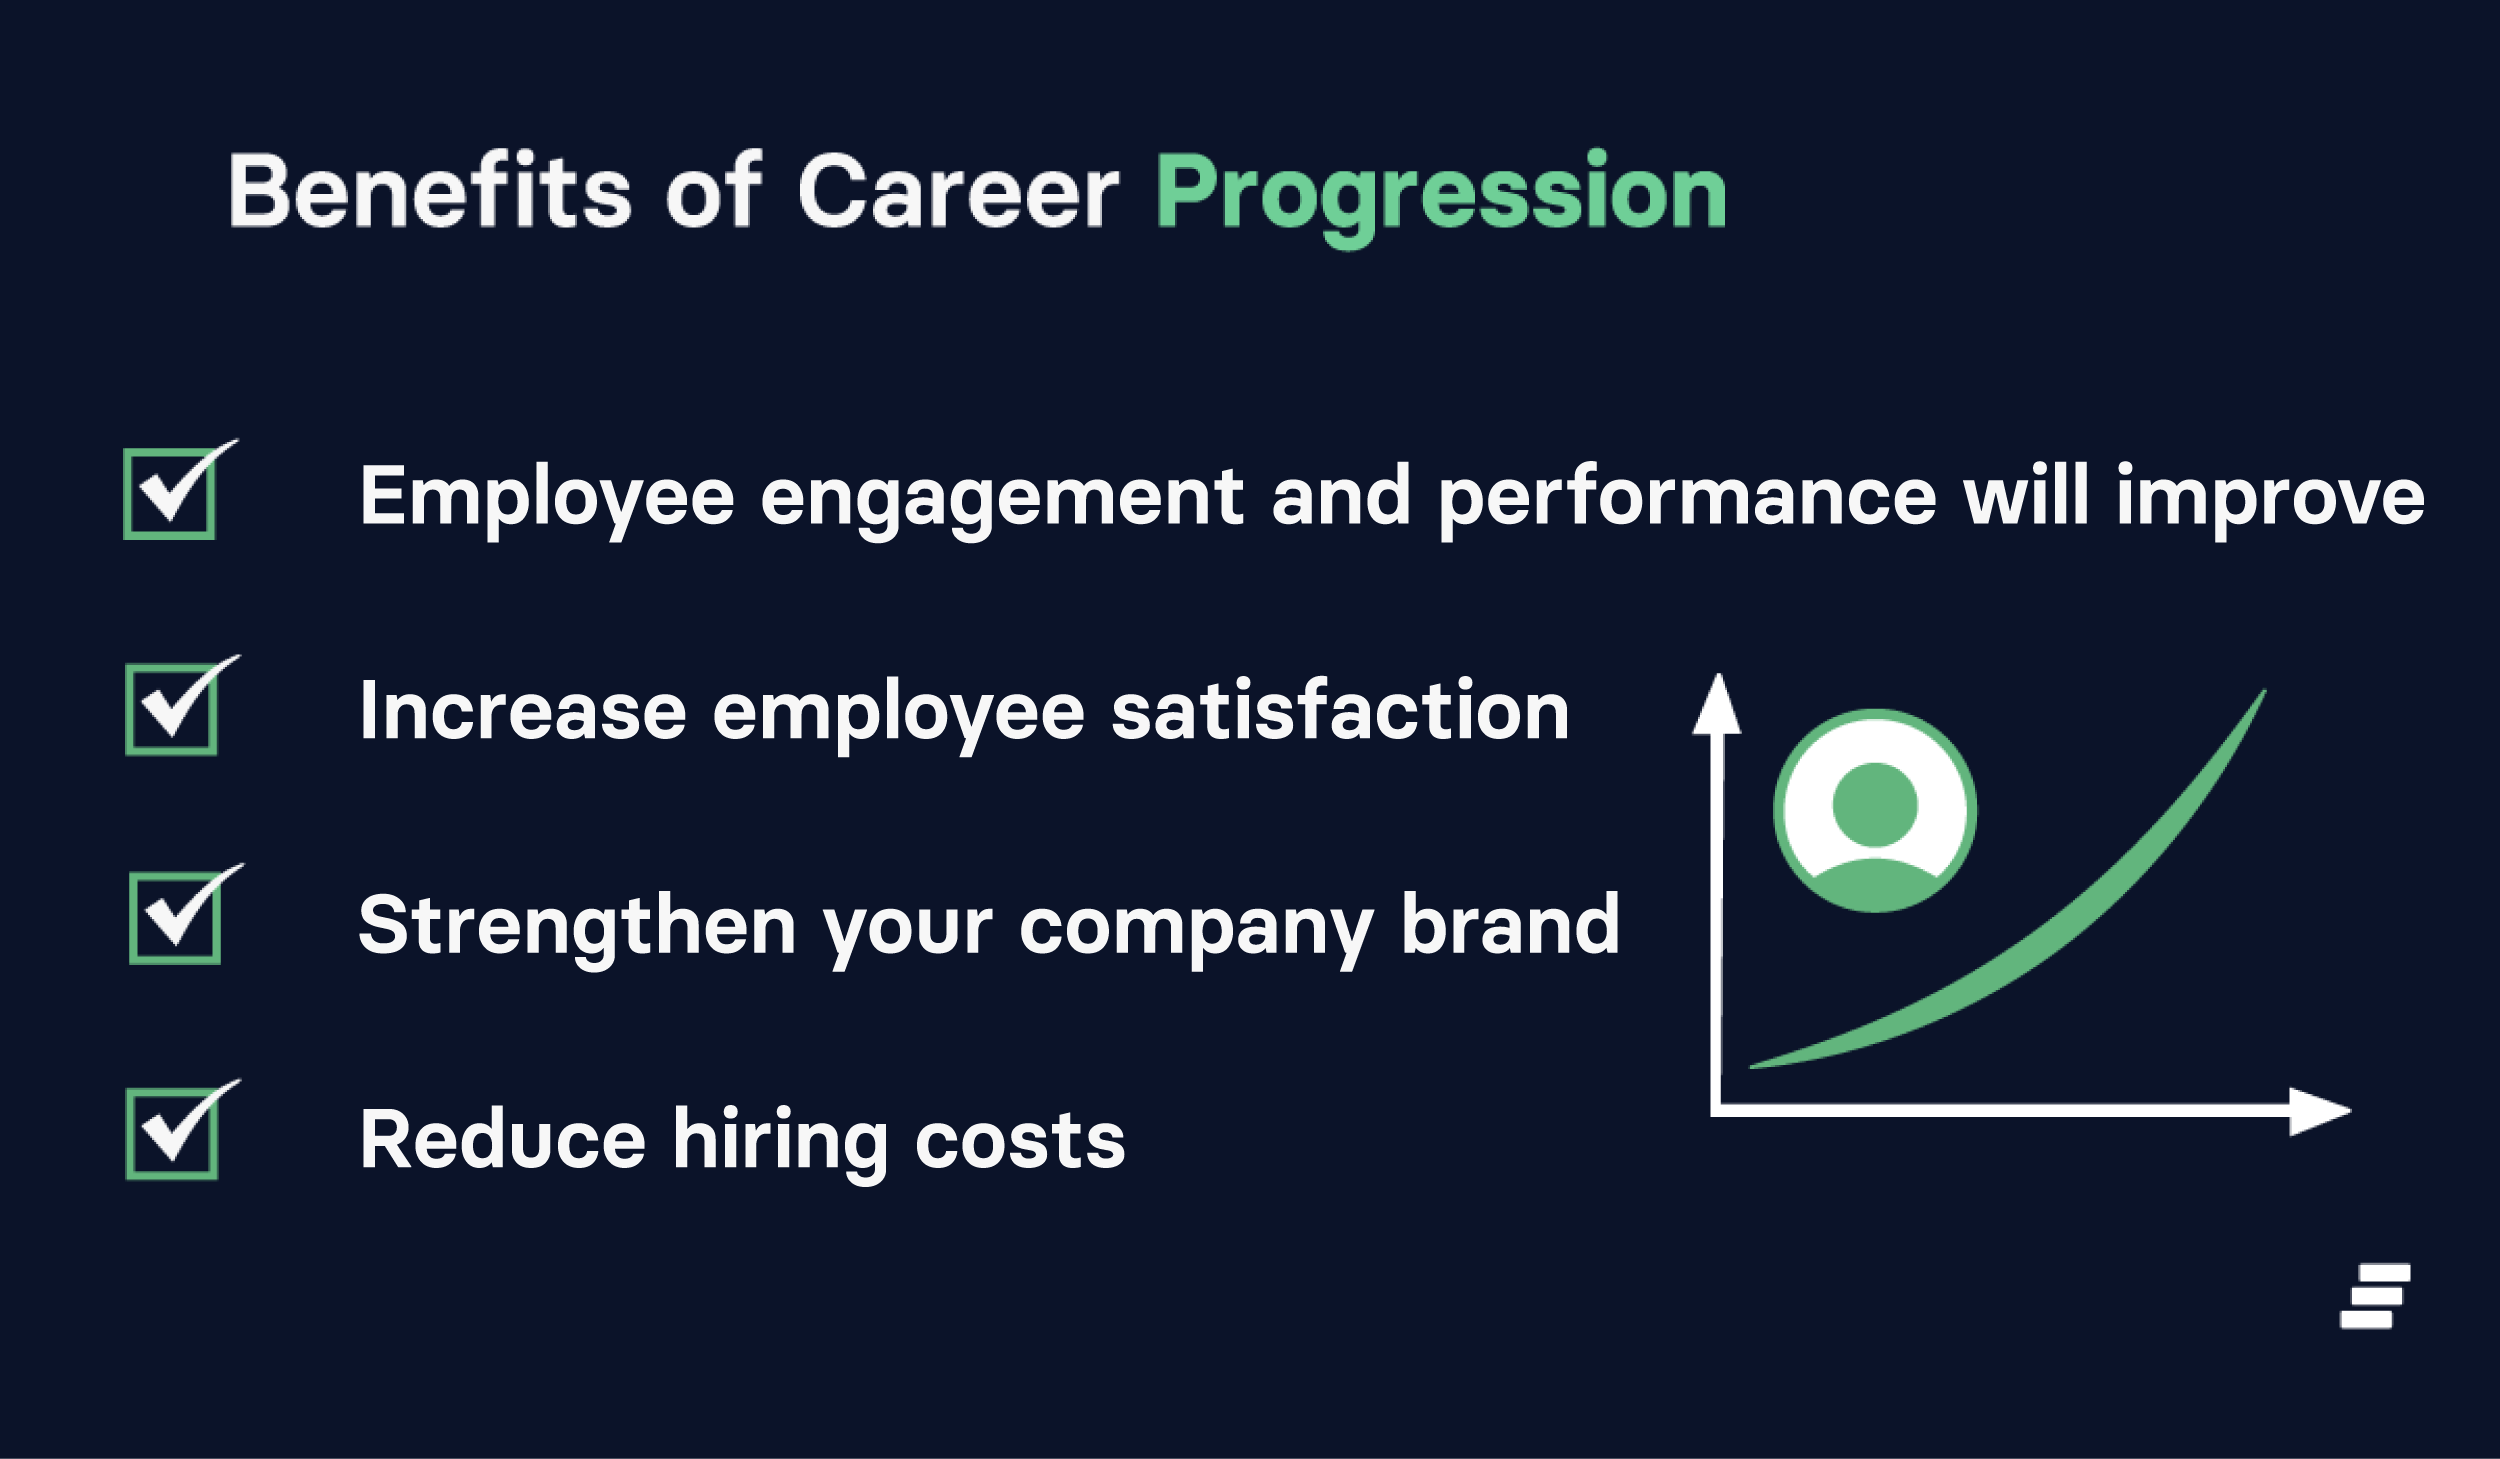 Graphic highlighting the benefits of career progression